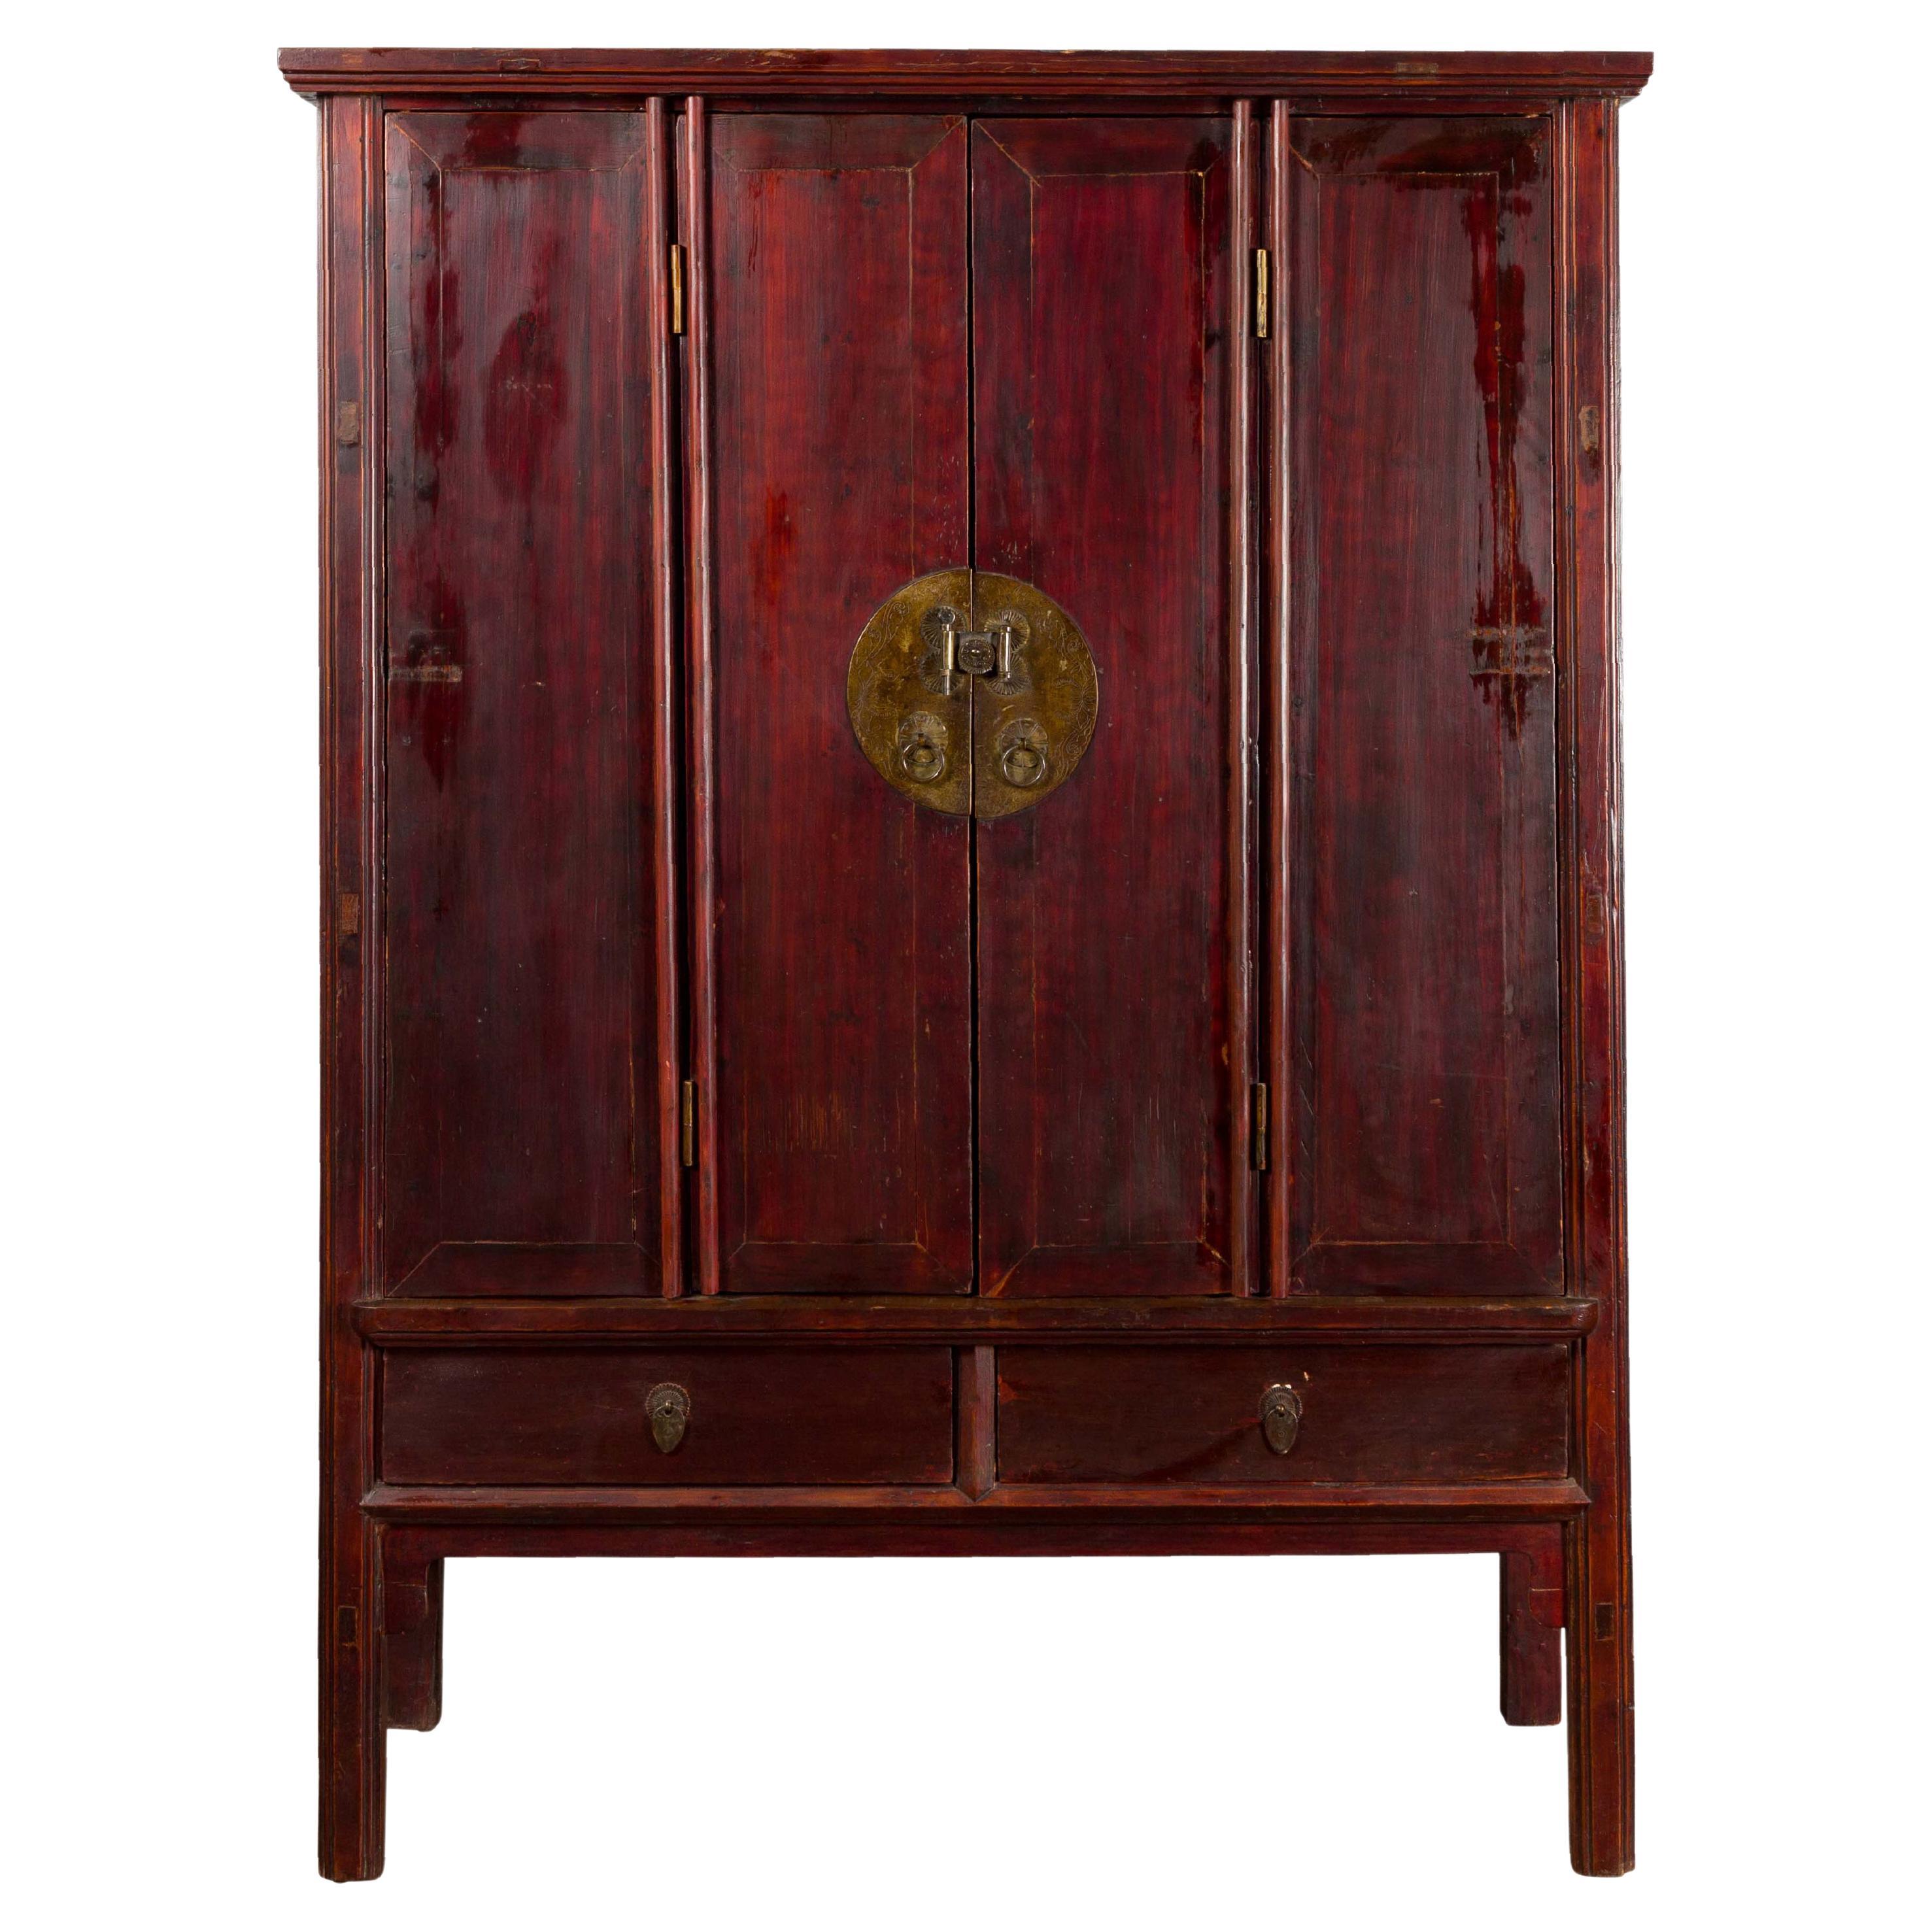 Large Chinese 19th Century Qing Dynasty Tapering Cabinet with Accordion Doors